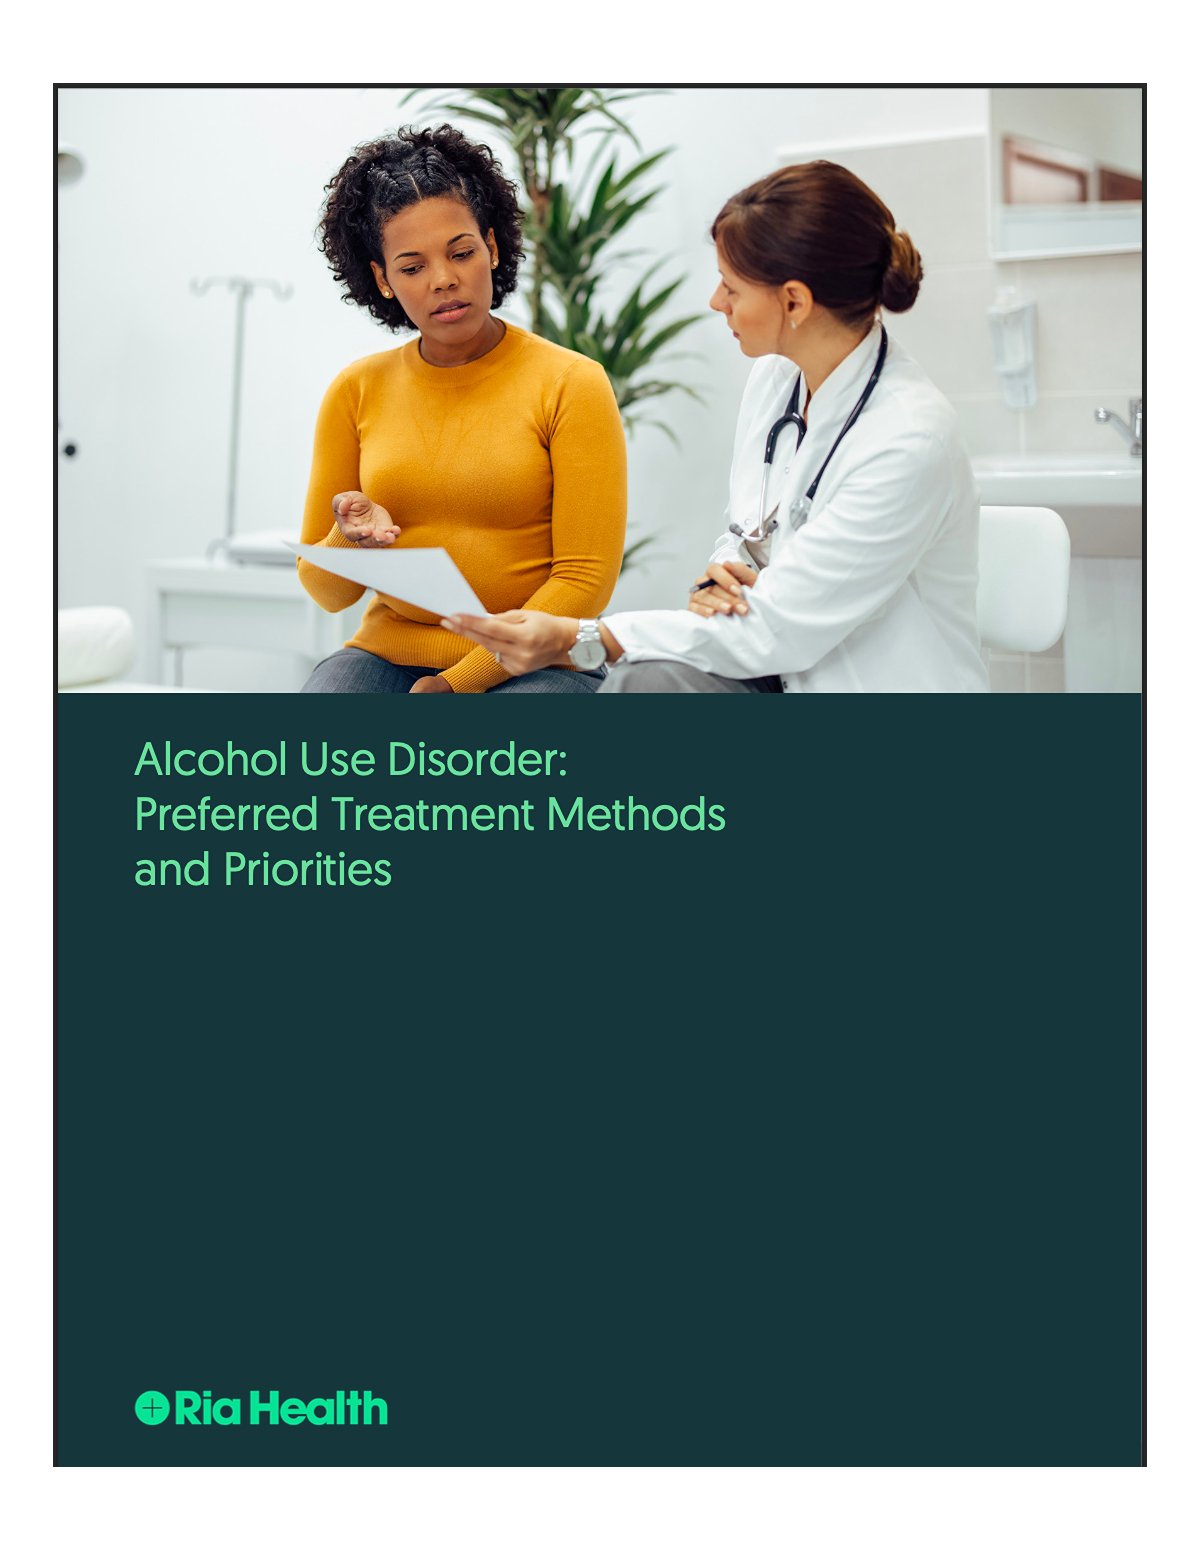 Alcohol Use Disorder: Preferred Treatments & Methods